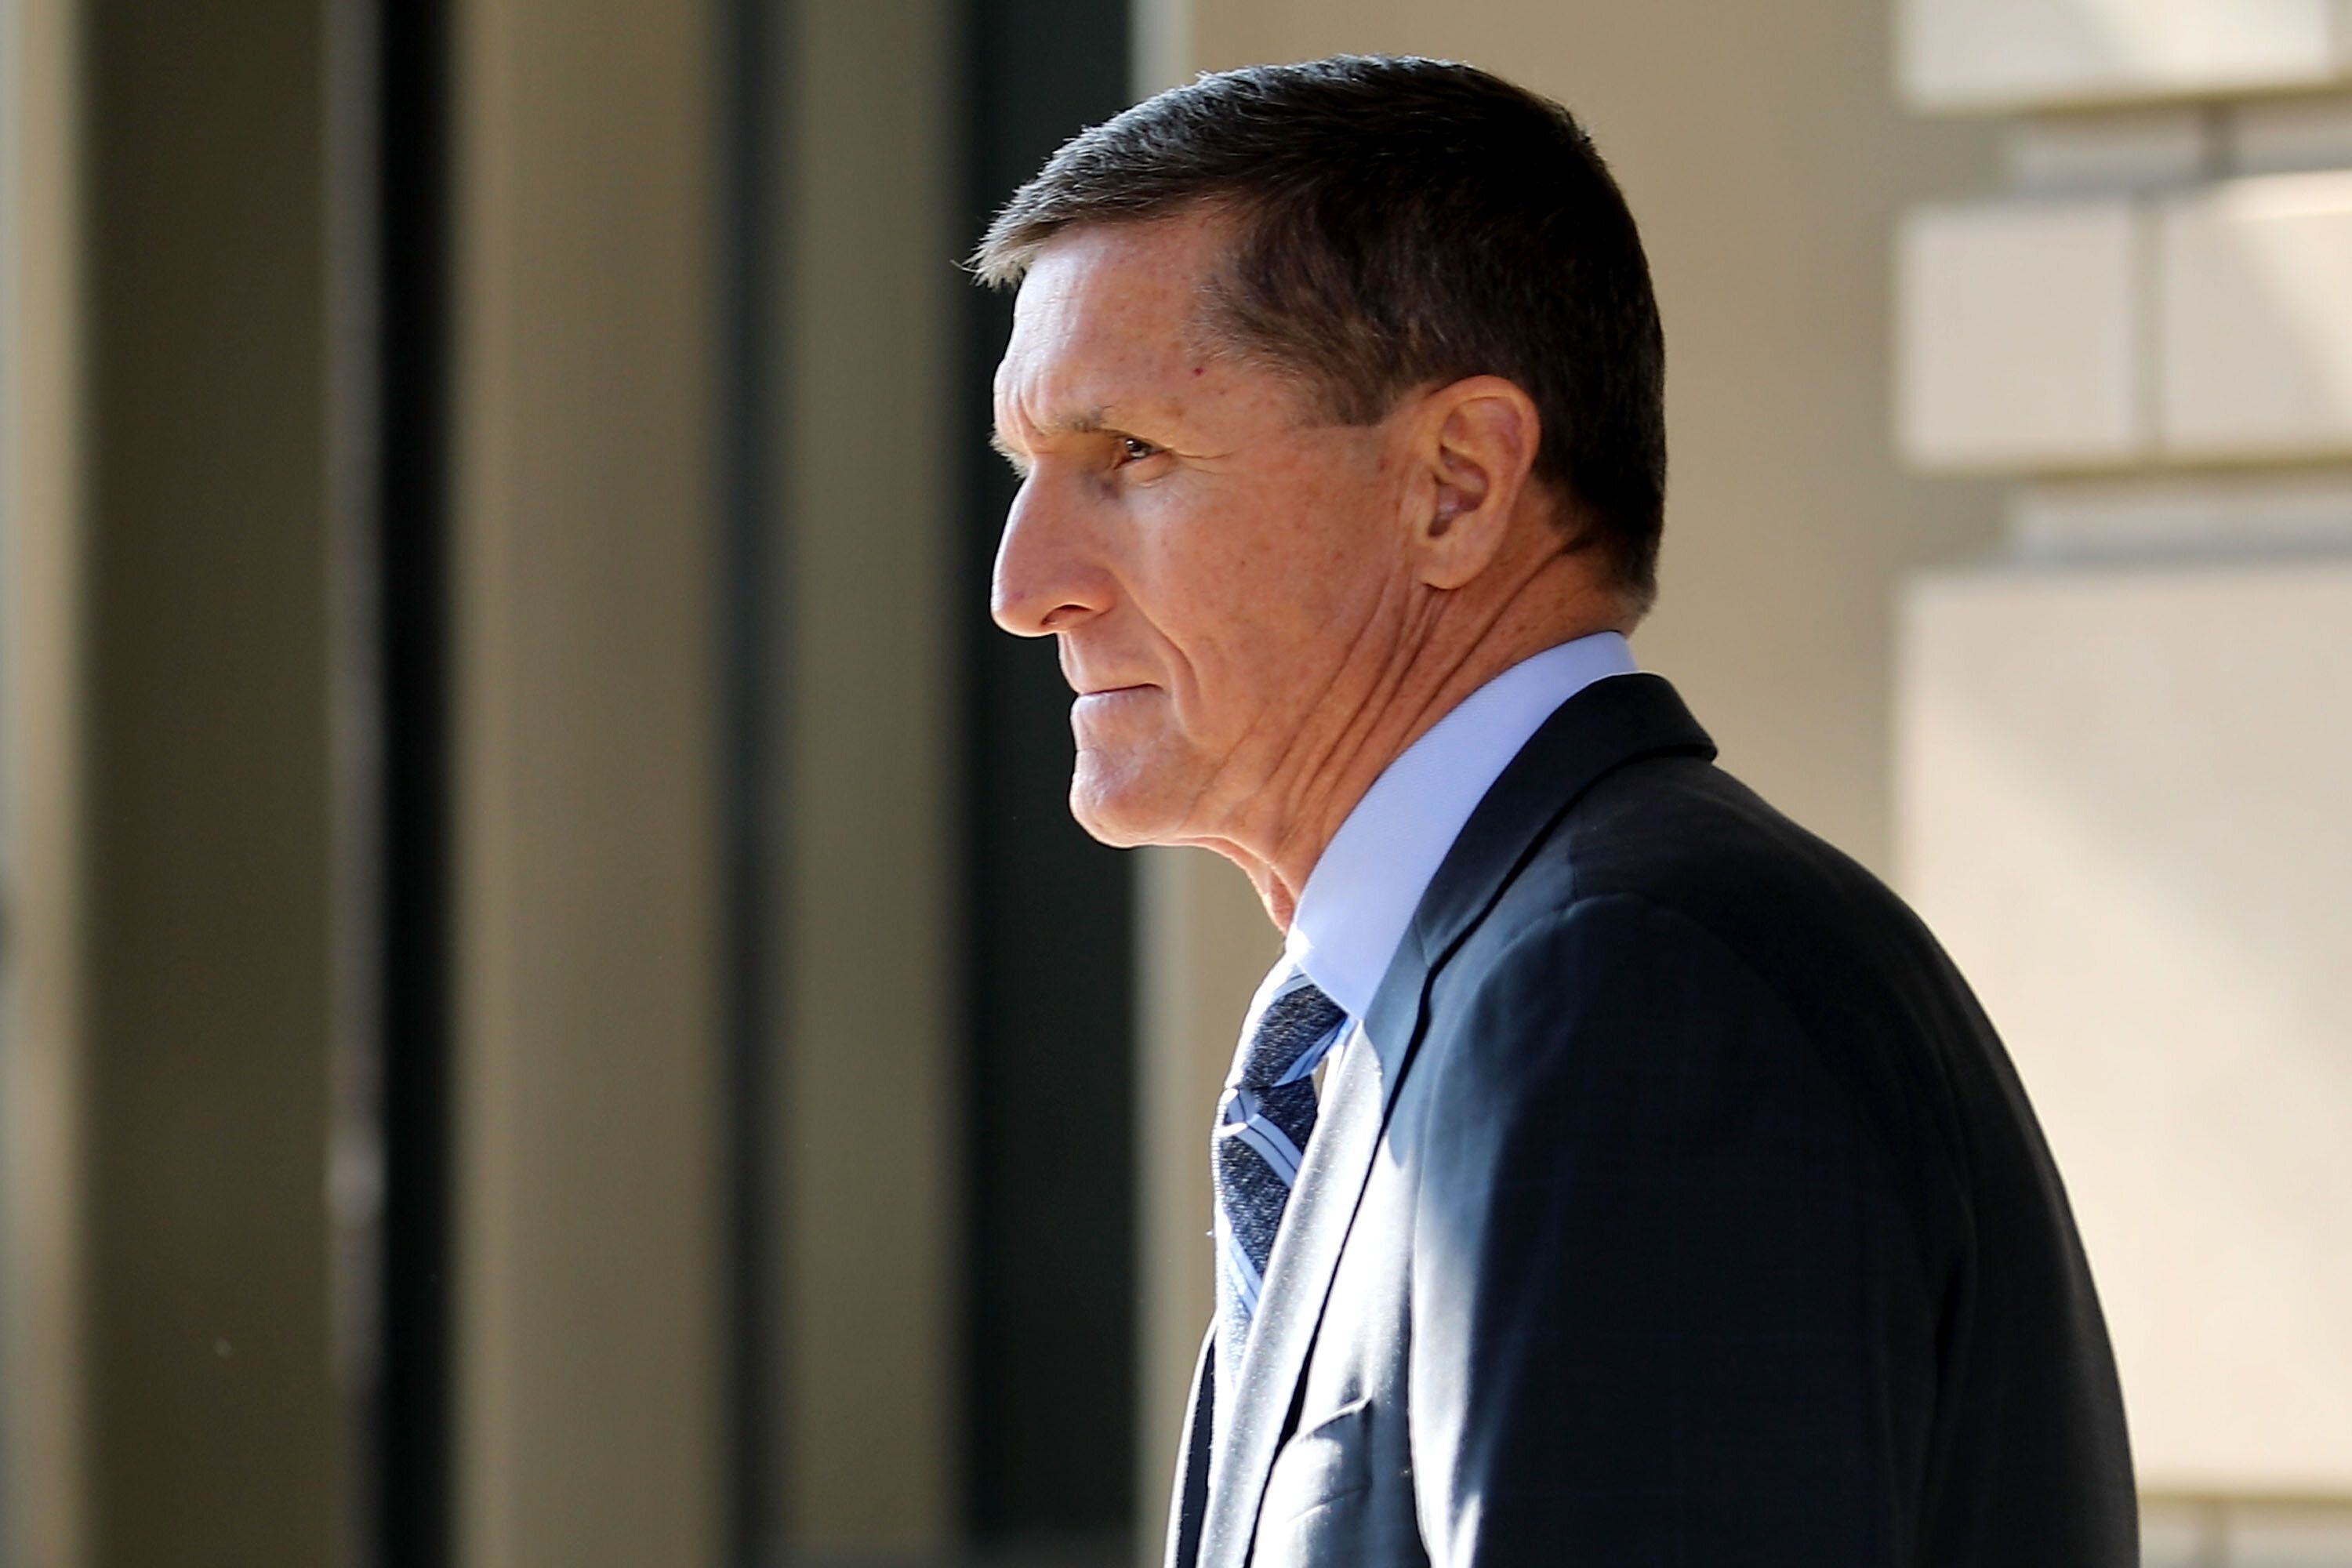 Politics: Skeptical Judge Could Hold Up Trump Administration's Bid To Clear Flynn, Legal Experts Say